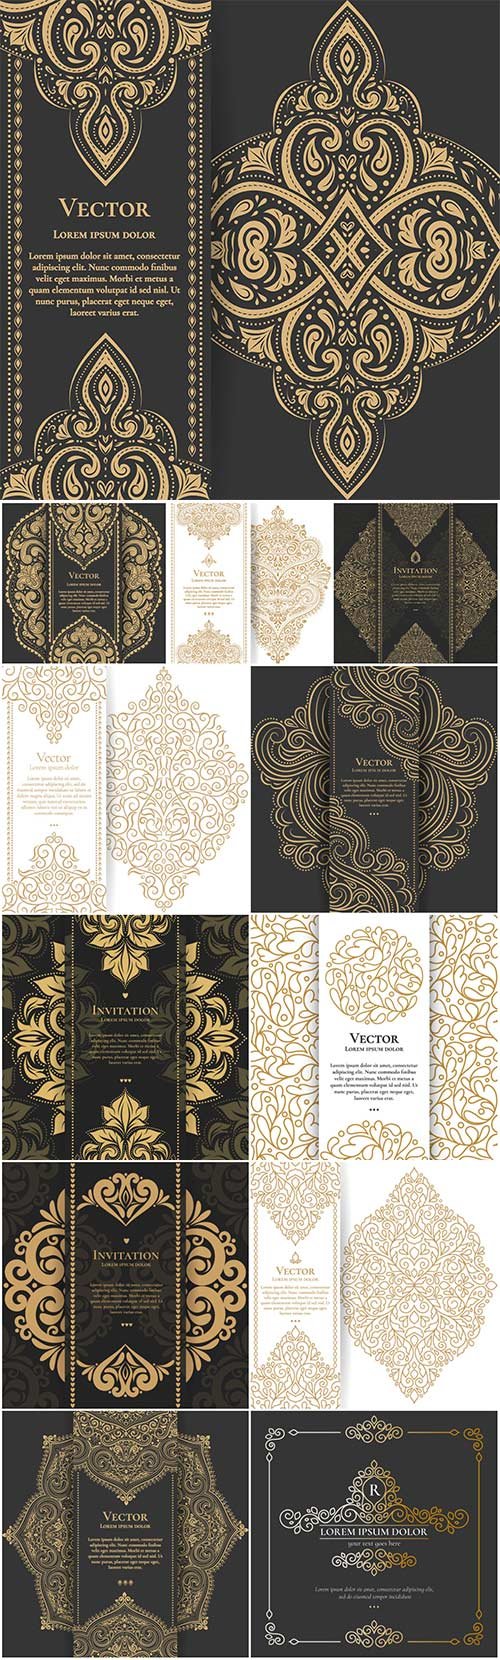 Vectors - Vintage backgrounds with gold patterns